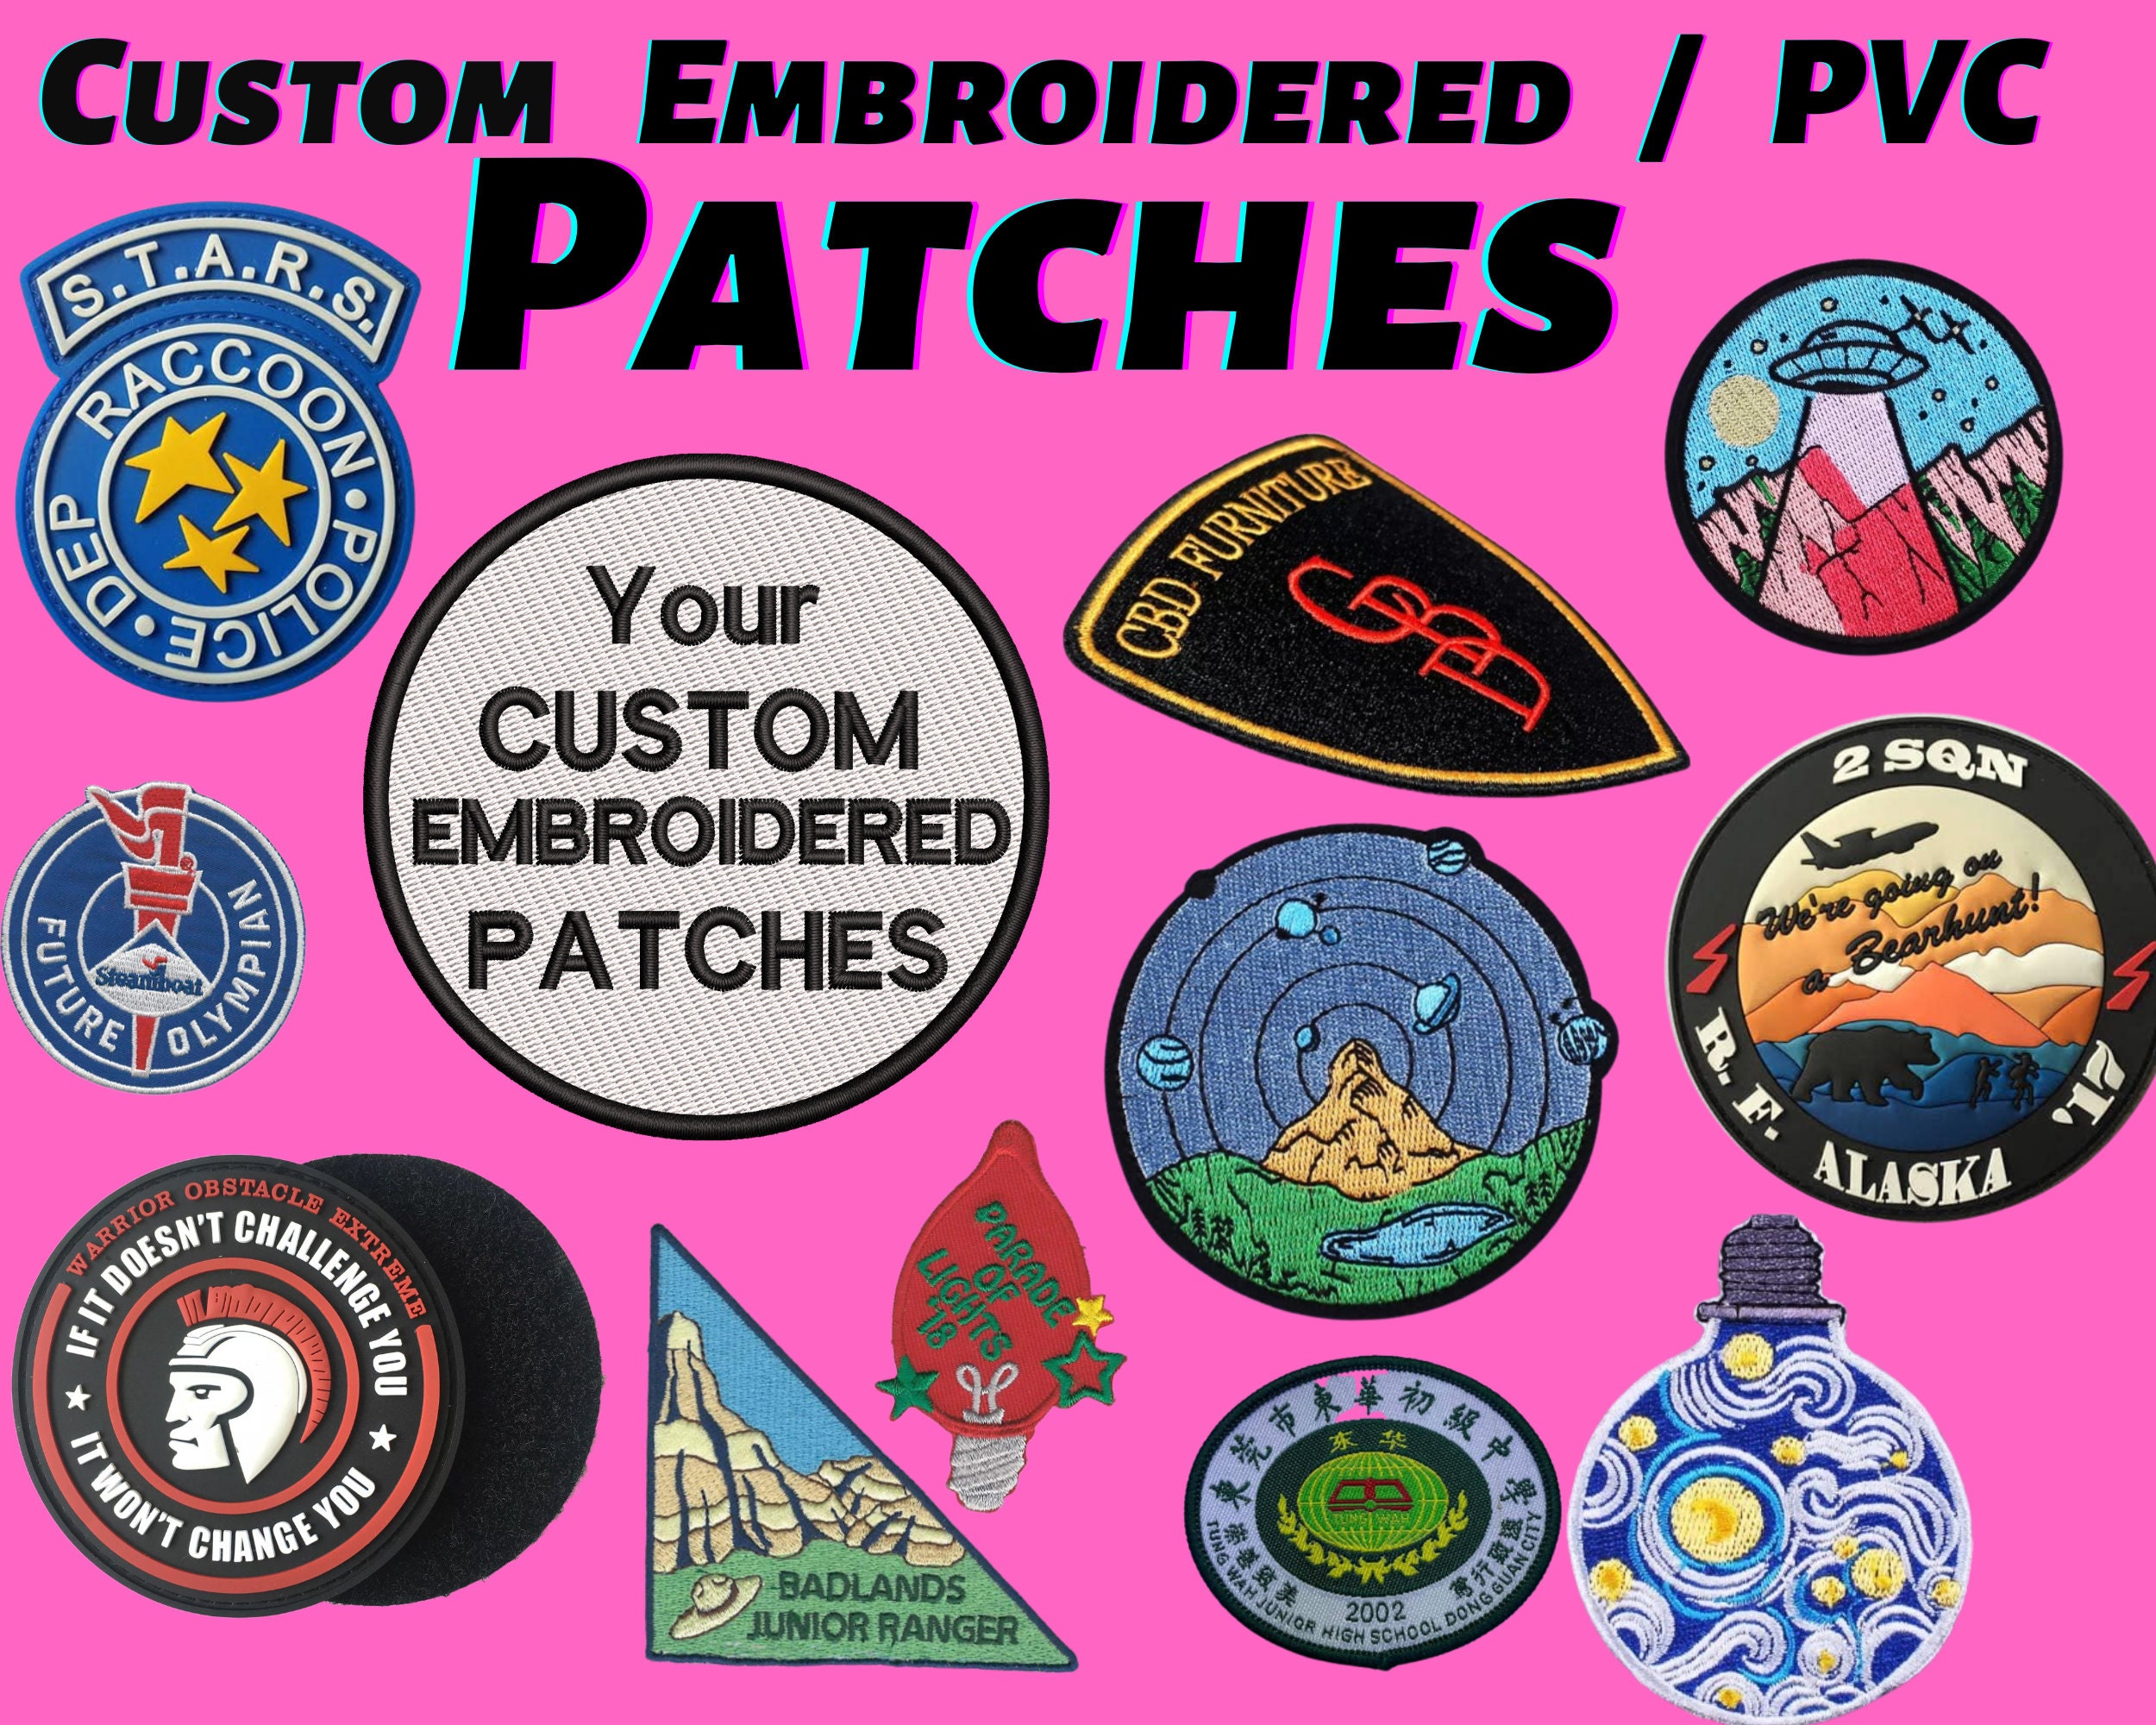 Embroidery Patches, Custom Embroidered Patches, Custom Patch, Sew